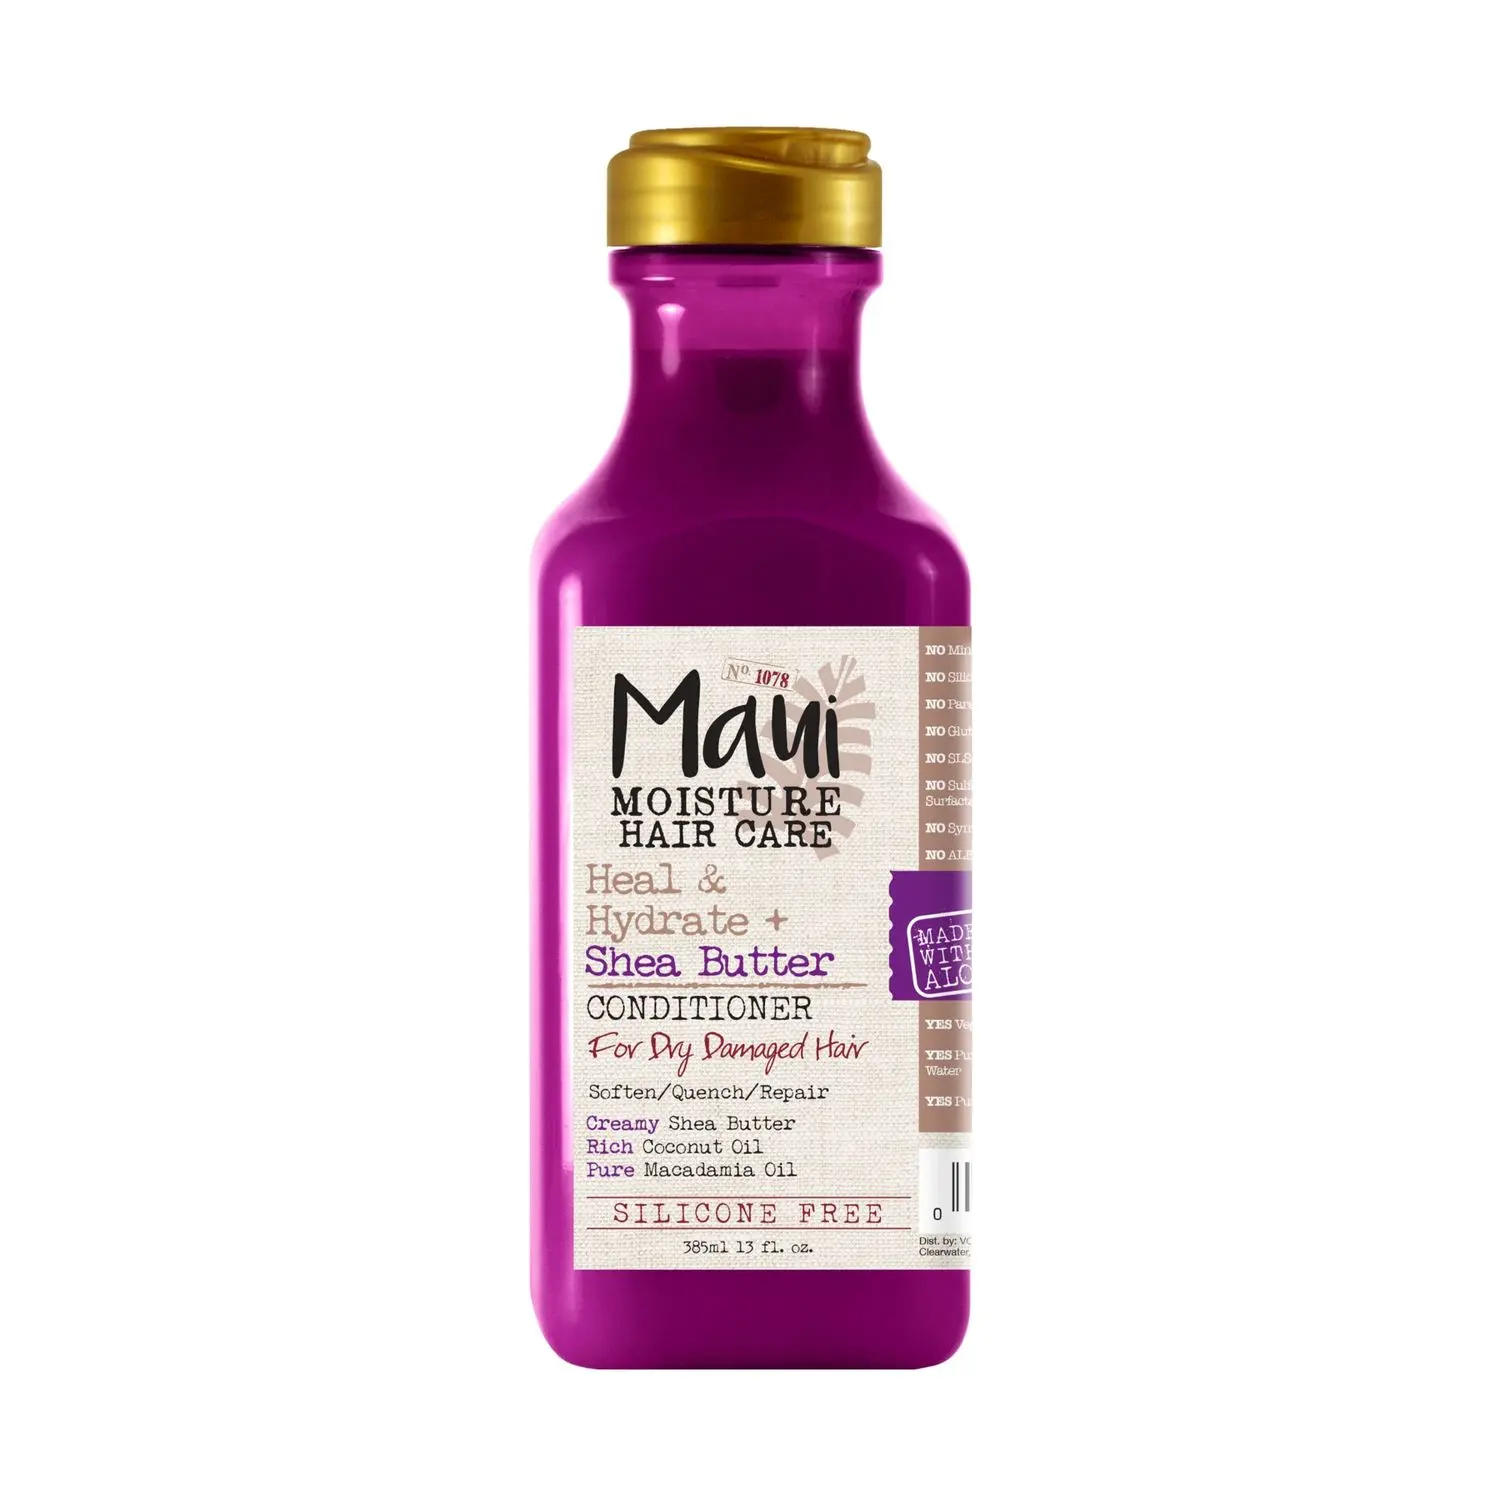 Maui Moisture Heal & Hydrate + Shea Butter Conditioner to Repair & Deeply Moisturize Tight Curly Hair with Coconut & Macademia Oils, Vegan, Silicone, Paraben & Sulfate-Free, 385ml